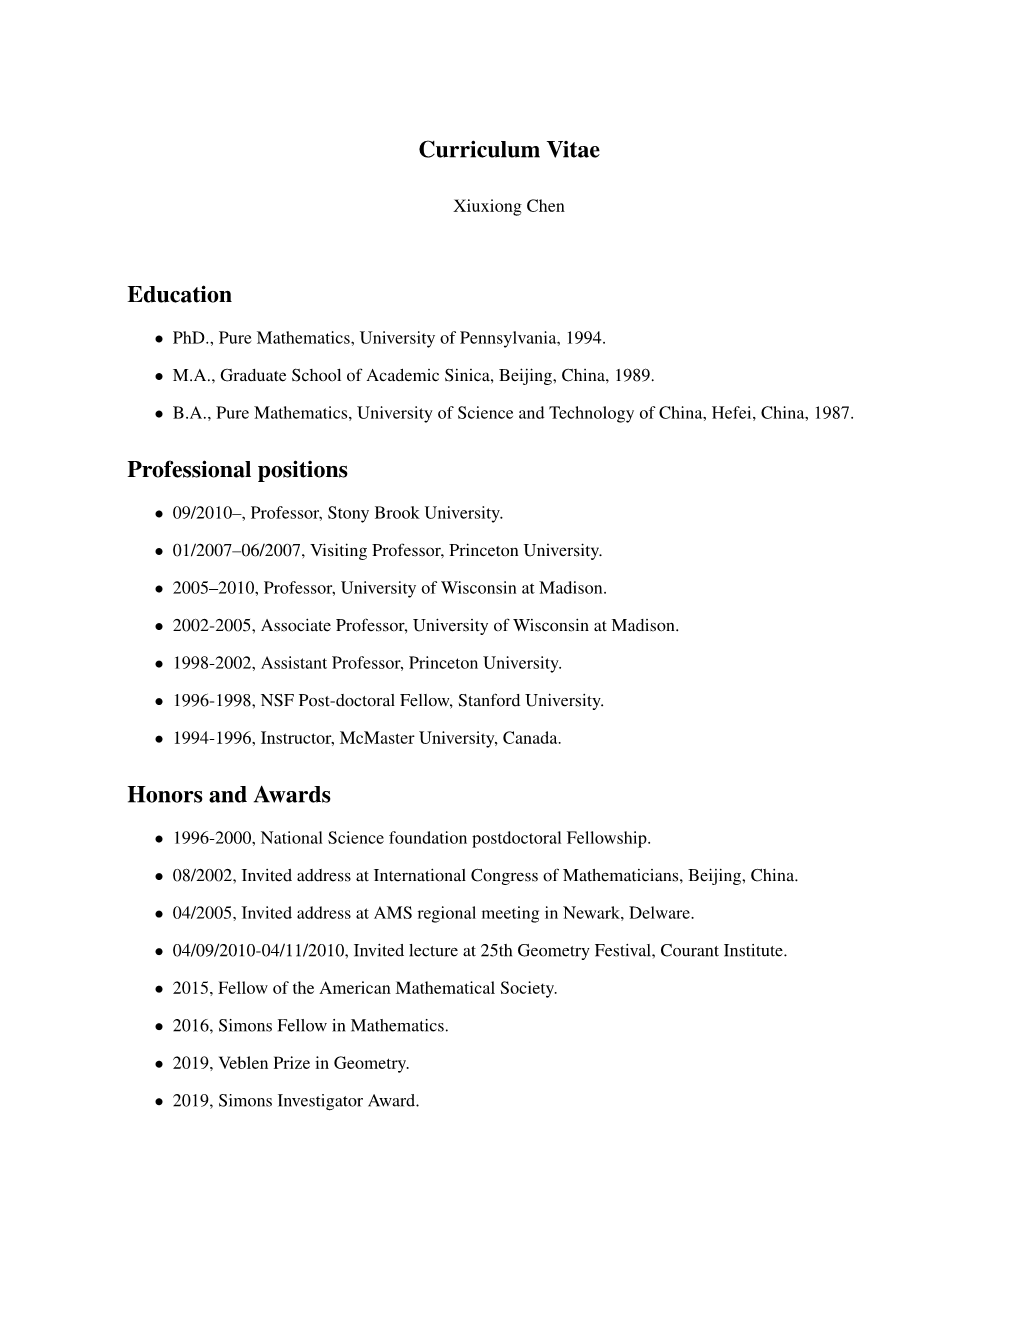 Curriculum Vitae Education Professional Positions Honors And